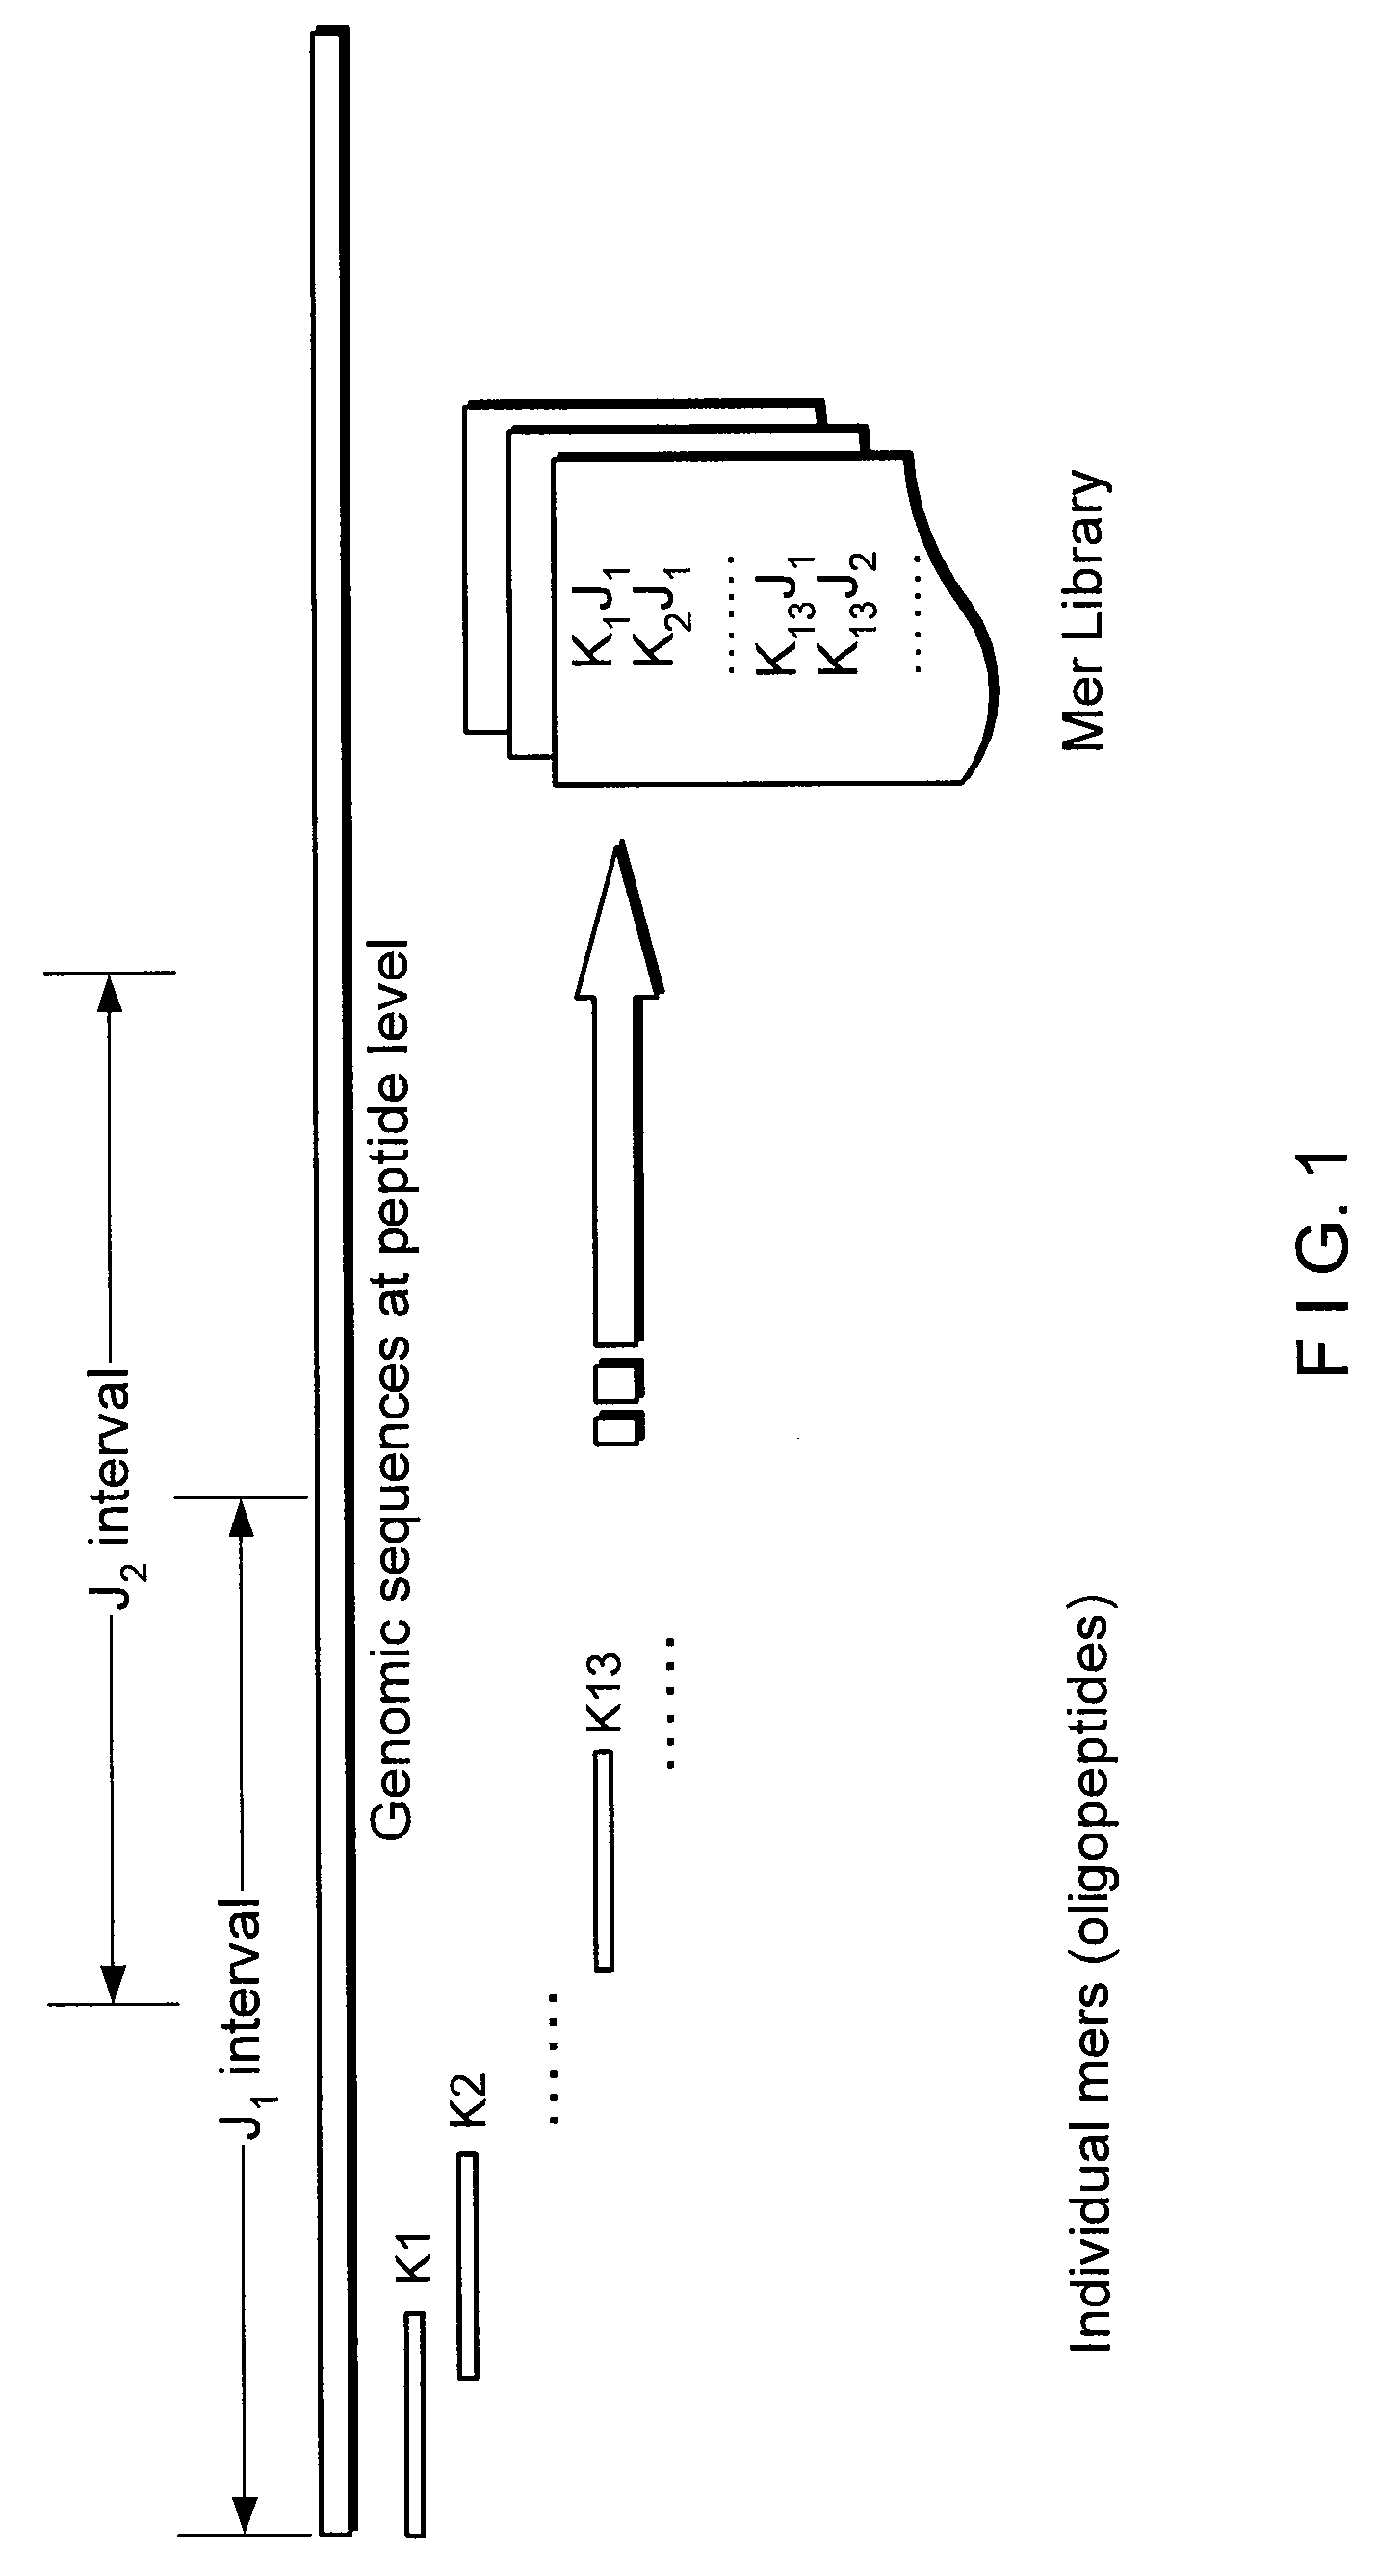 System and method for rapid searching of highly similar protein-coding sequences using bipartite graph matching